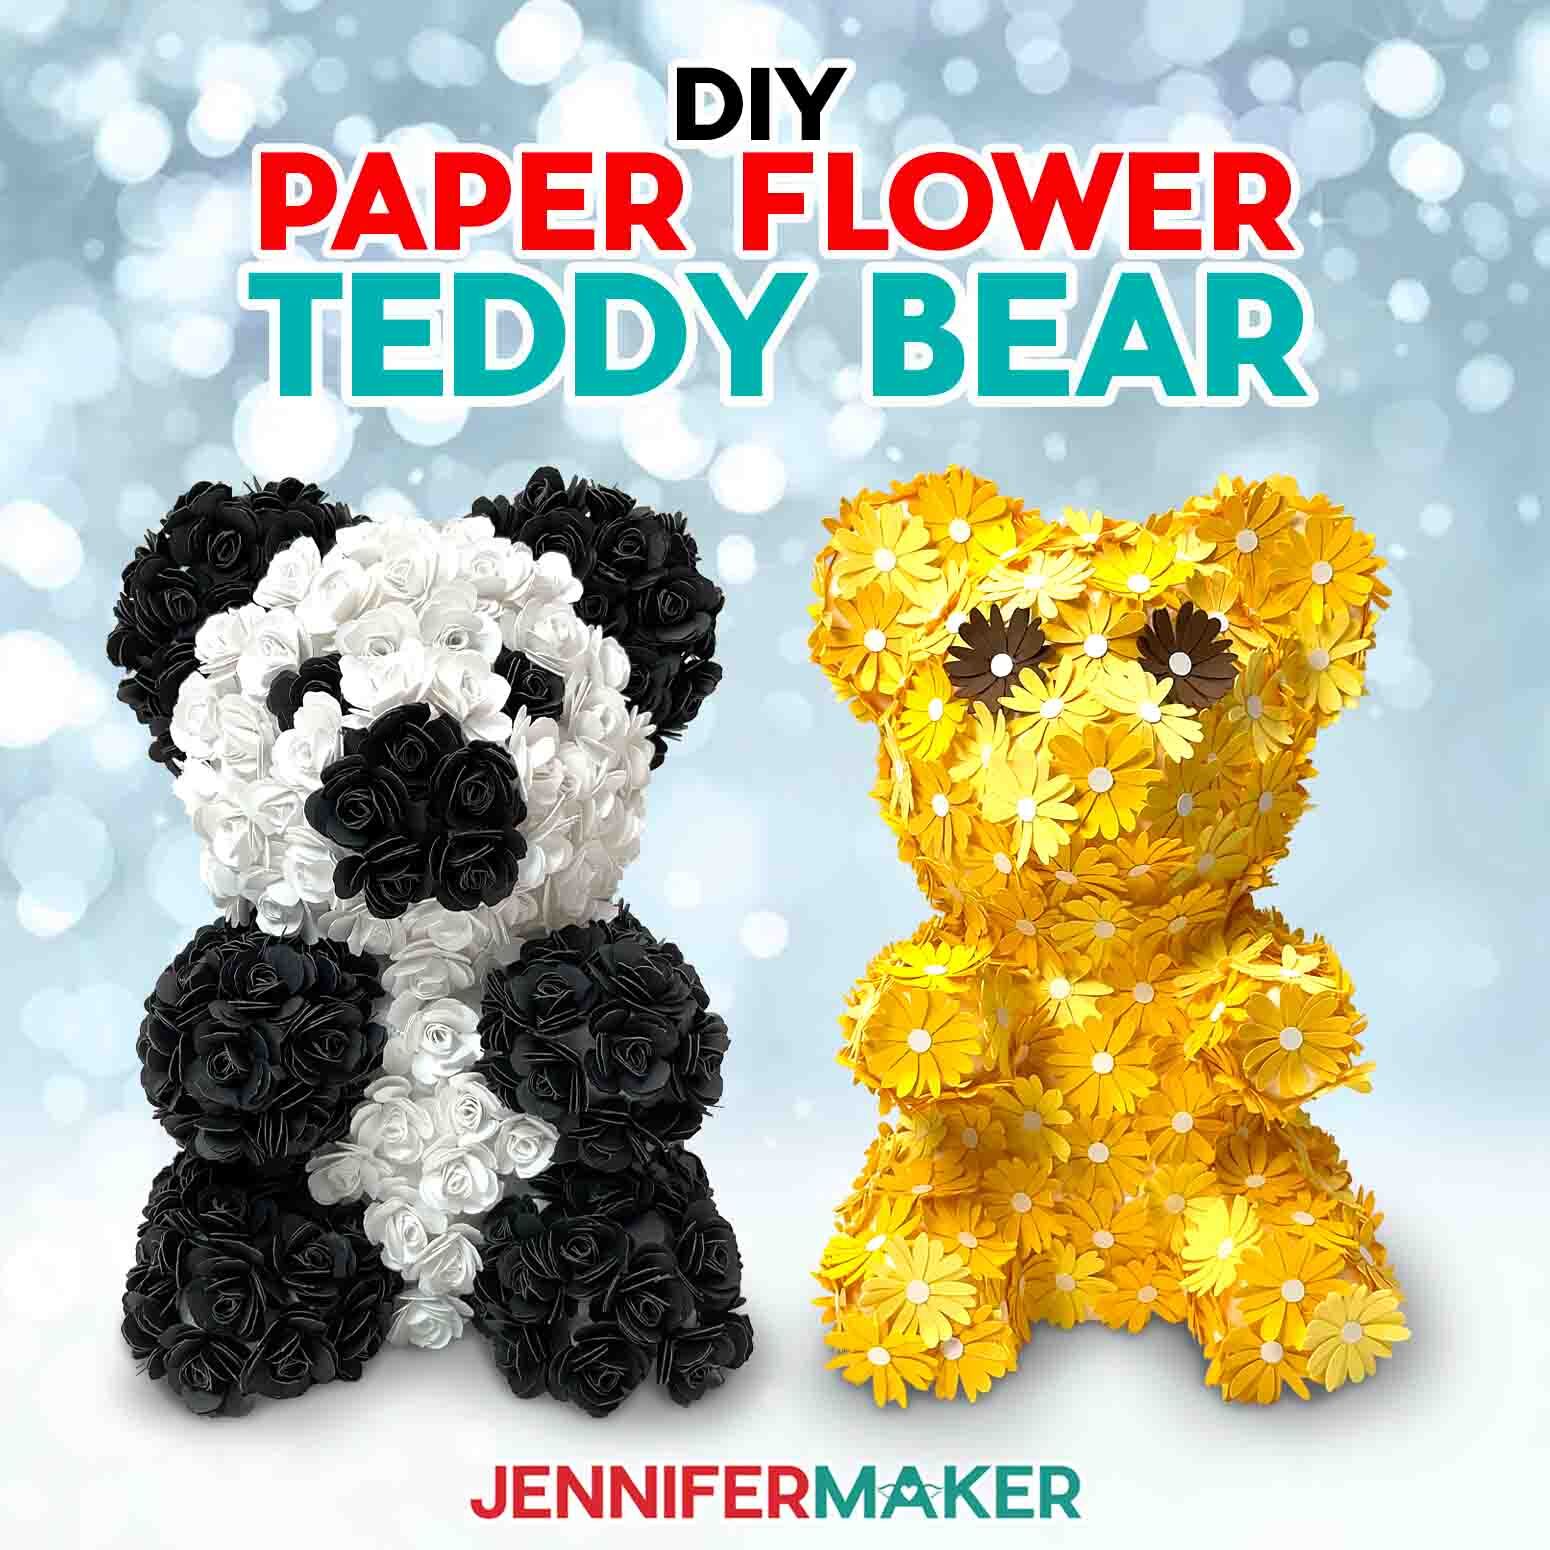 Create a Paper Flower Teddy Bear with JenniferMaker's tutorial! A panda made of black and white rolled paper roses sits next to a yellow bear made of paper daisies.